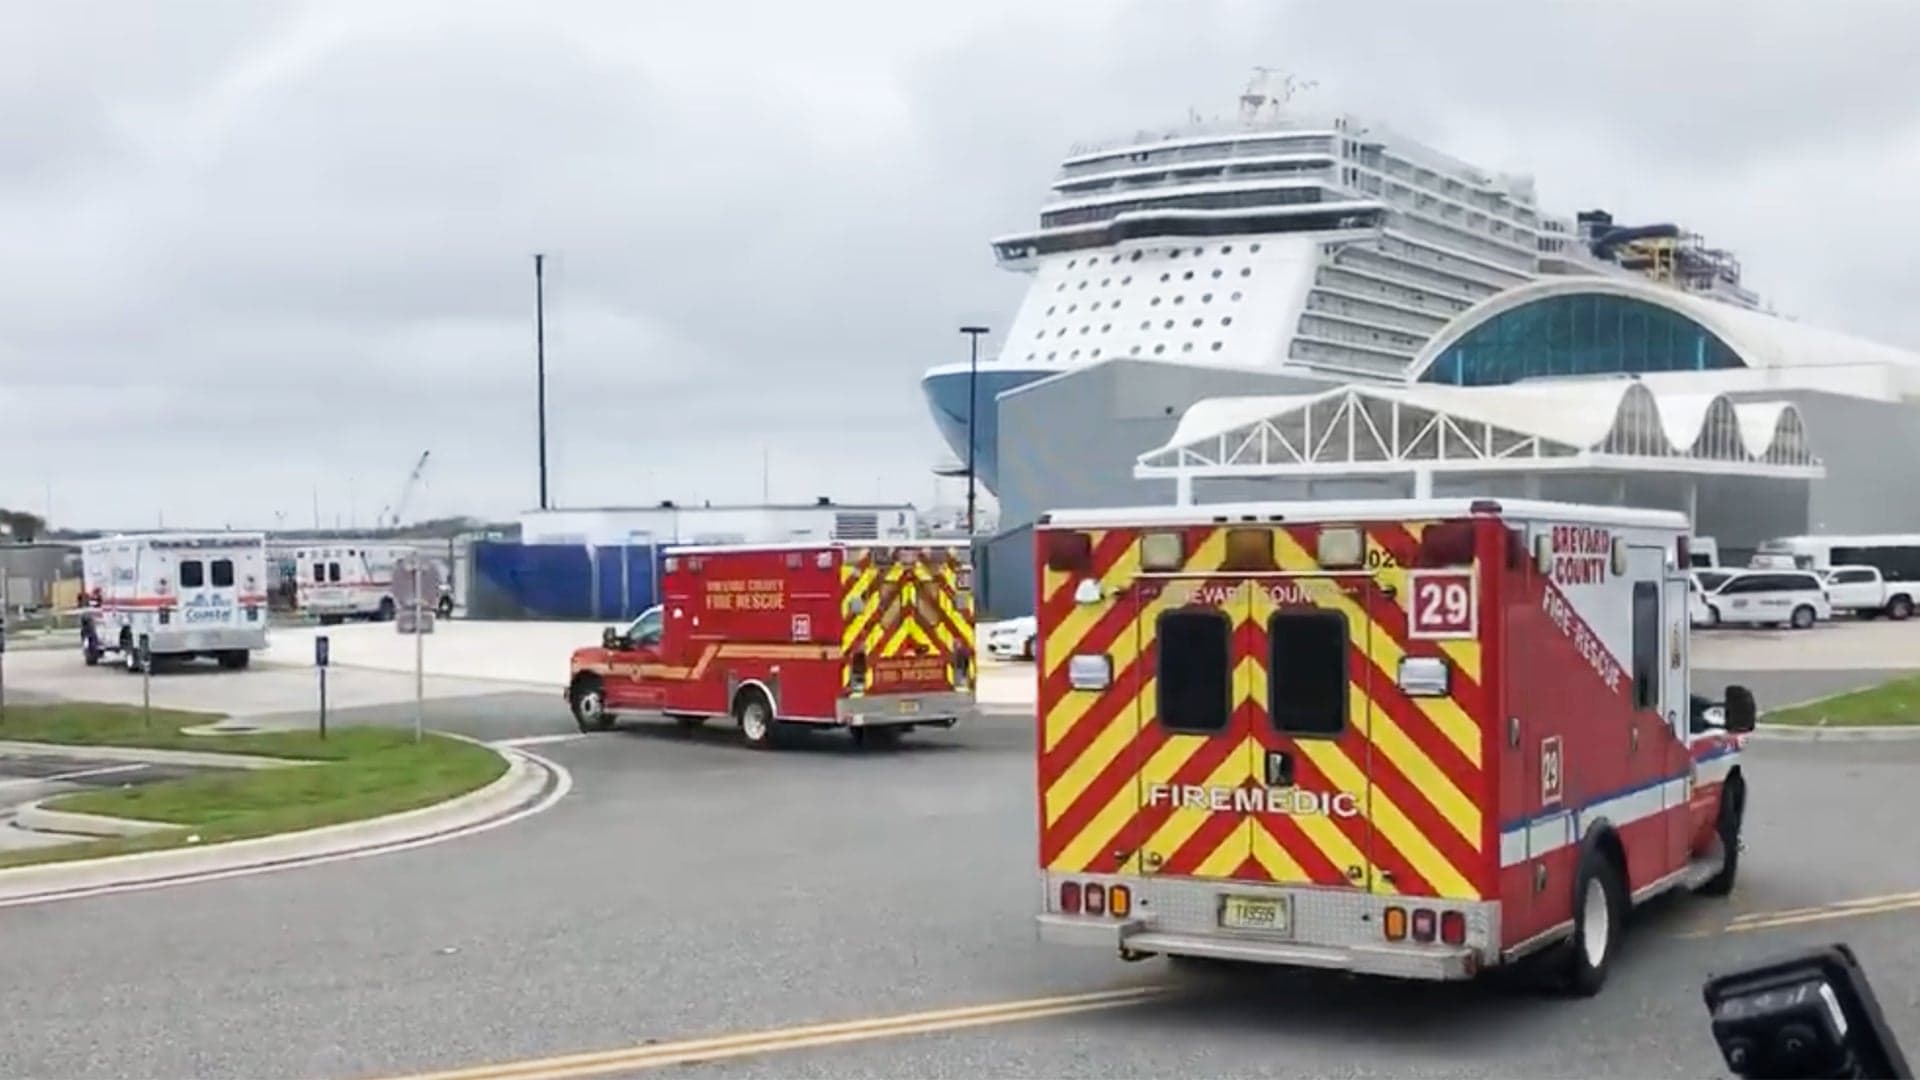 ‘Blood Everywhere’: Cruise Ship Tilted By Freak 115-MPH Wind Gust, Passengers Injured